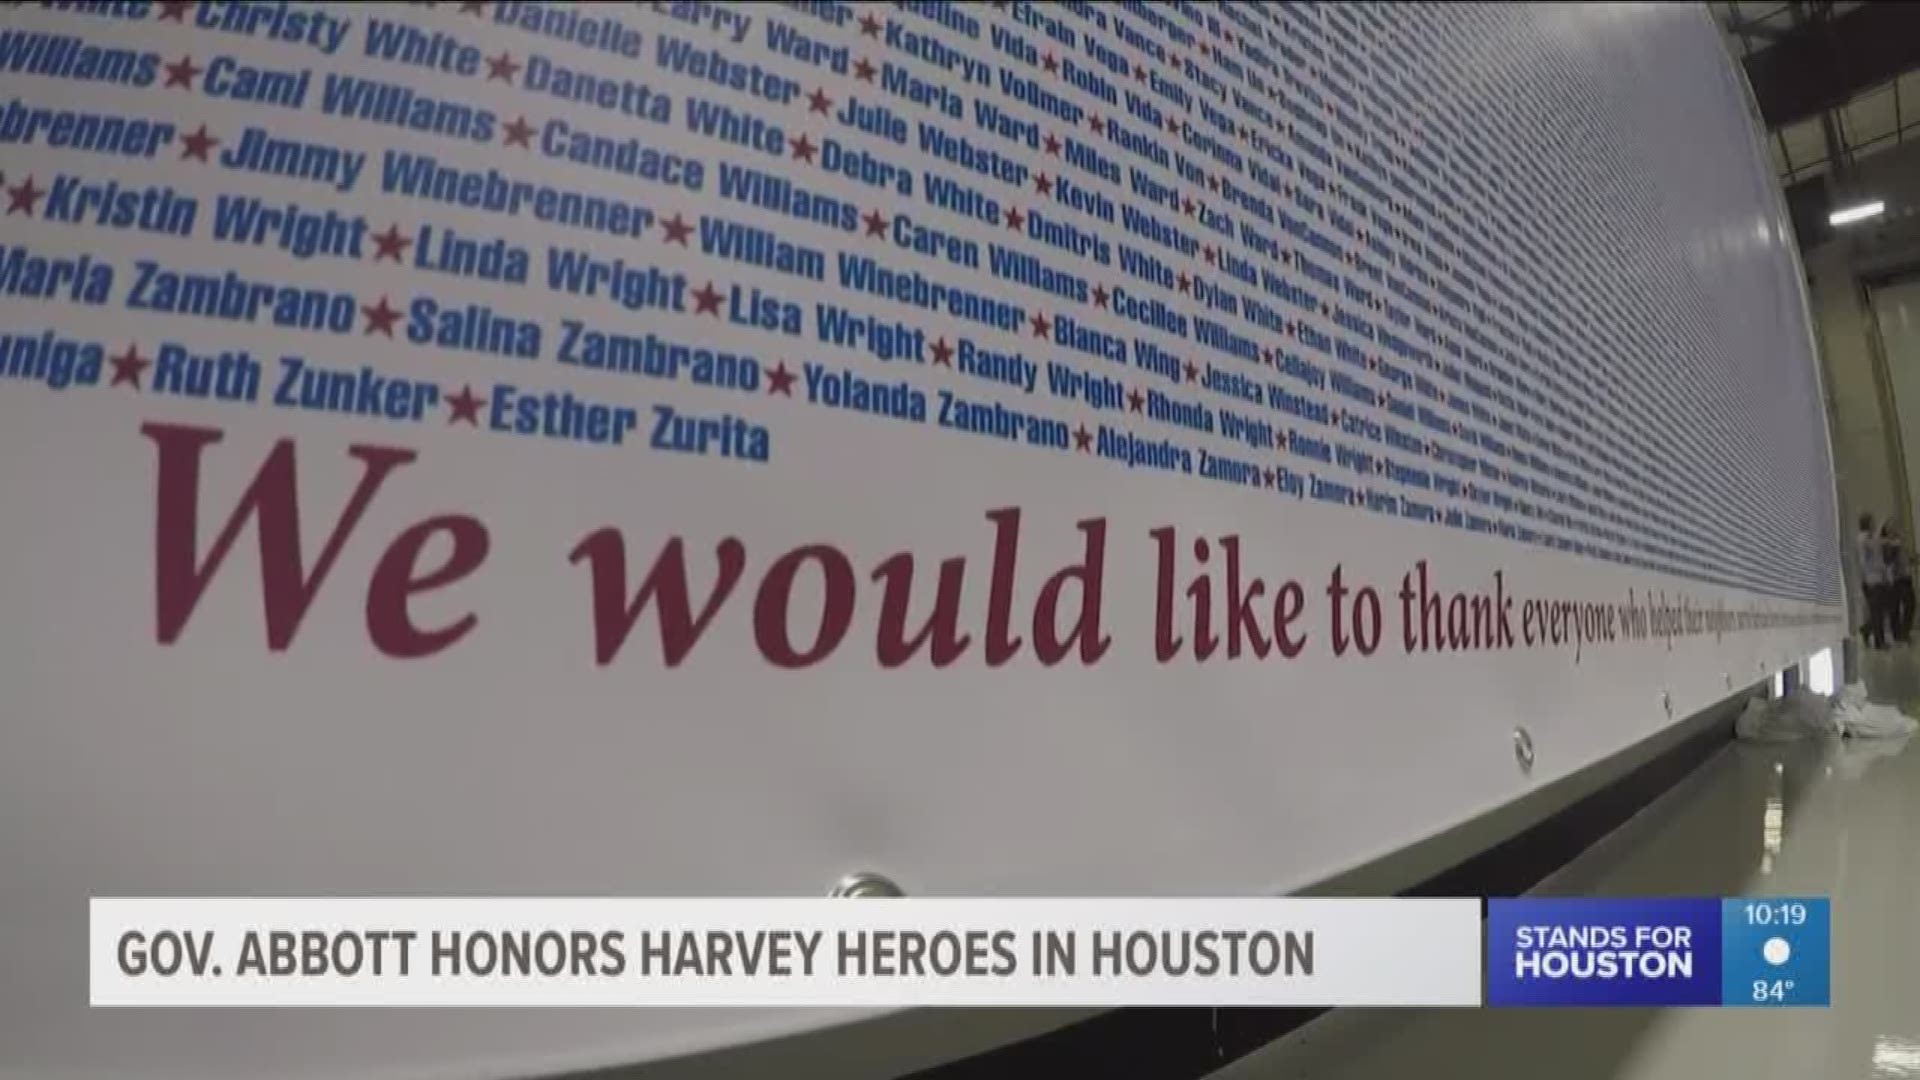 People who risked their lives to save others during Hurricane Harvey were honored Thursday night by Gov. Greg Abbott.